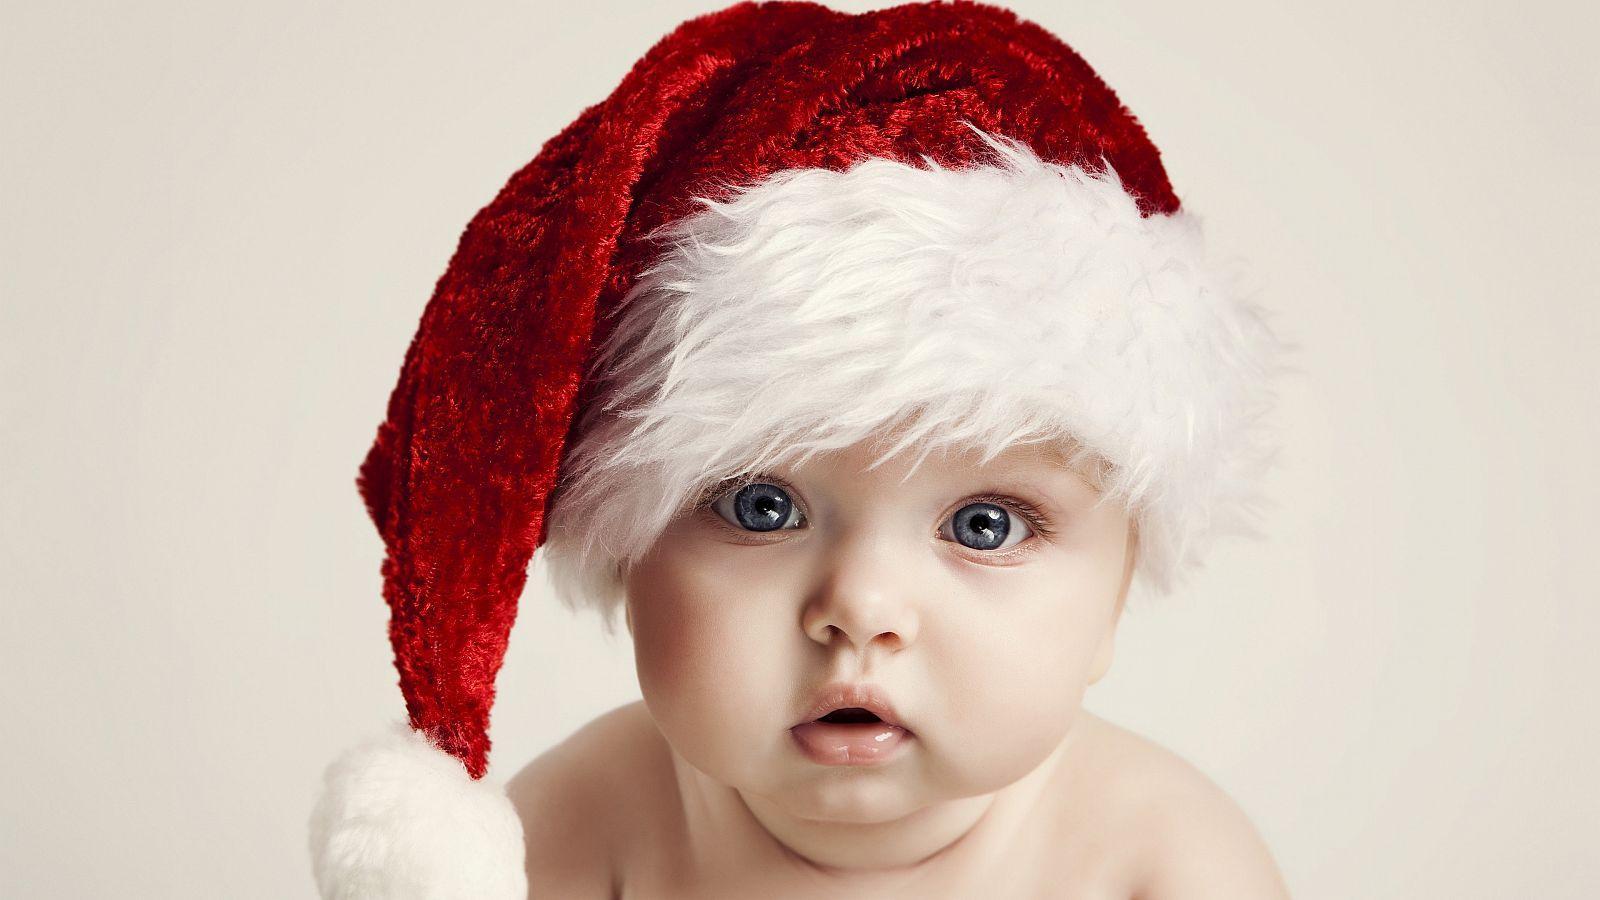 Baby Cute Wallpaper HD Free Apps on Google Play